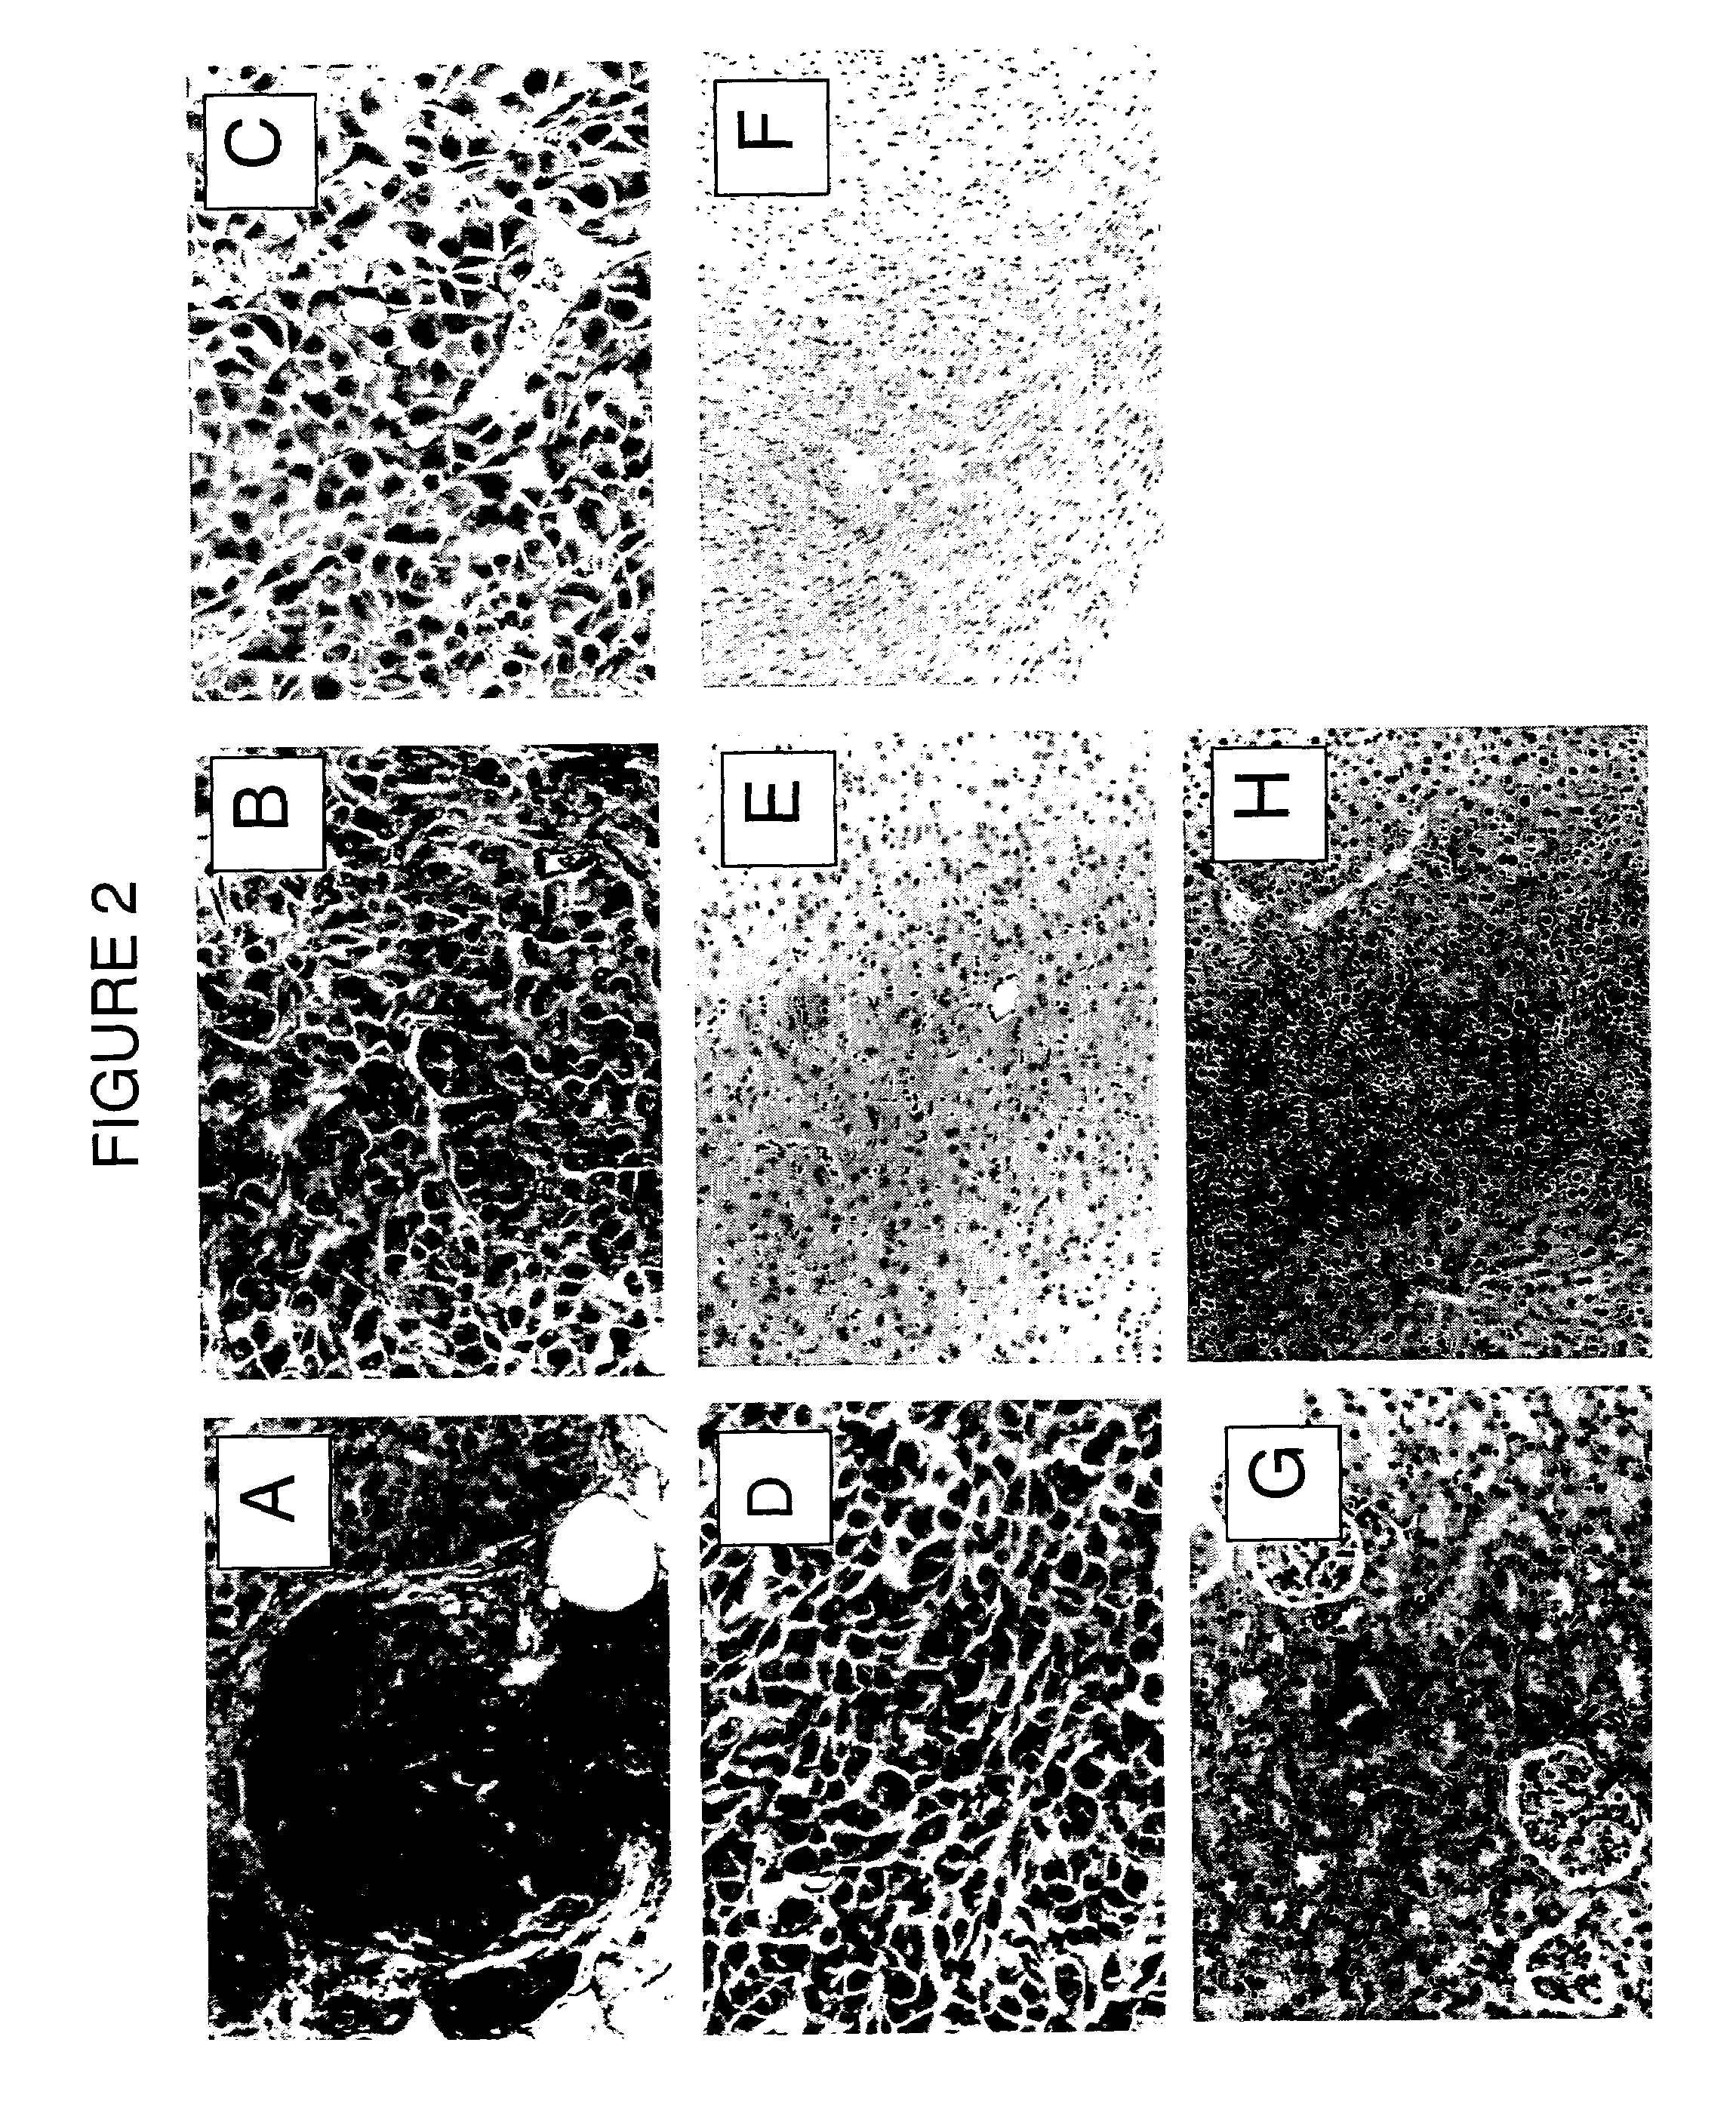 Collagen-binding molecules that selectively home to tumor vasculature and methods of using same